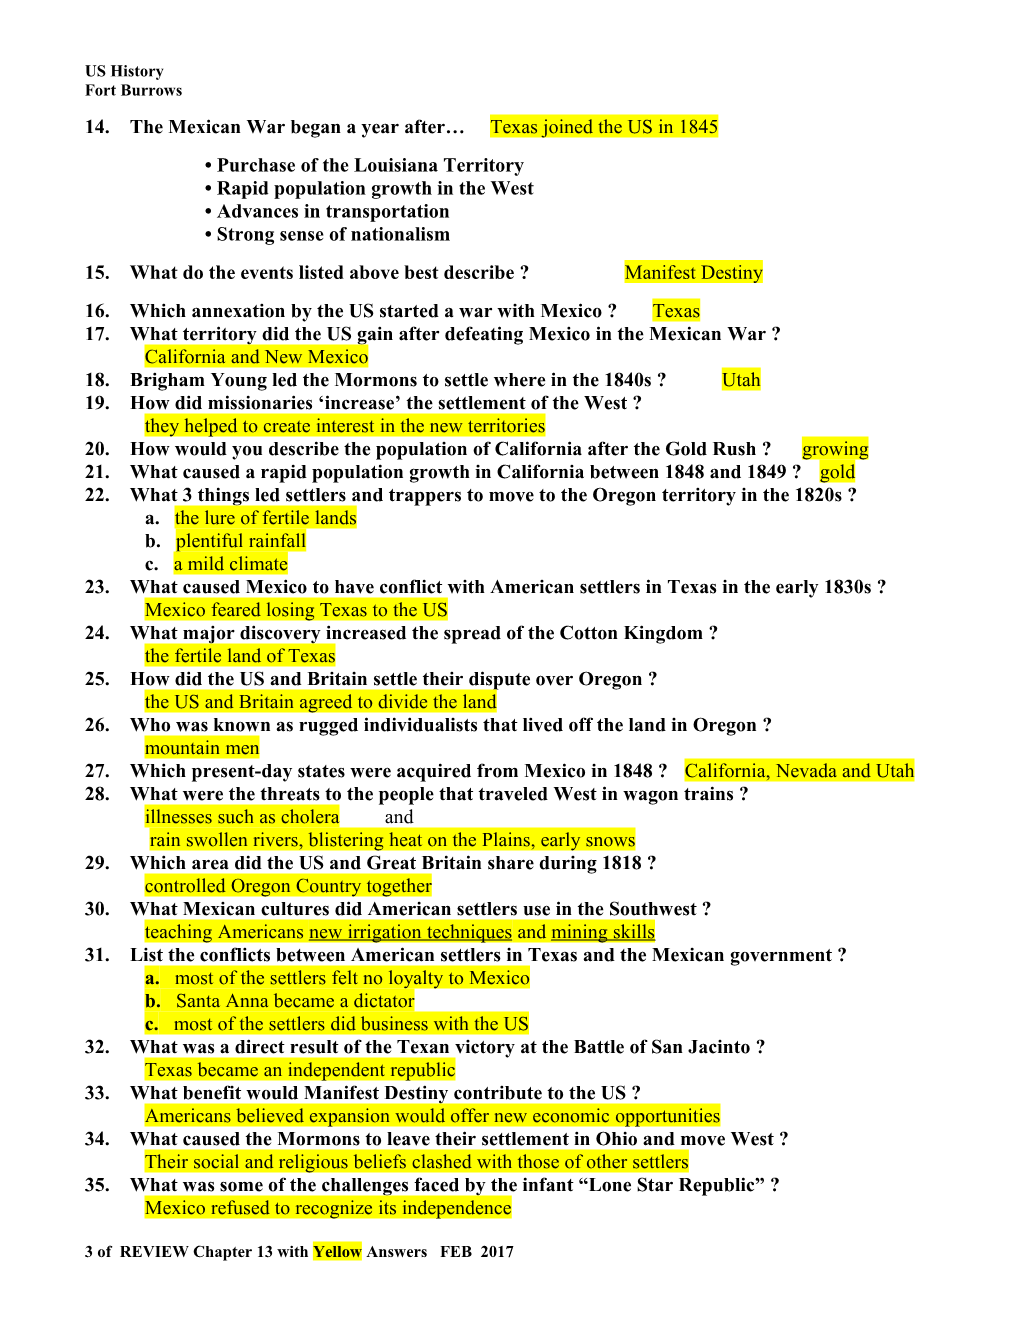 Review Chapter 13 with Yellow Answers